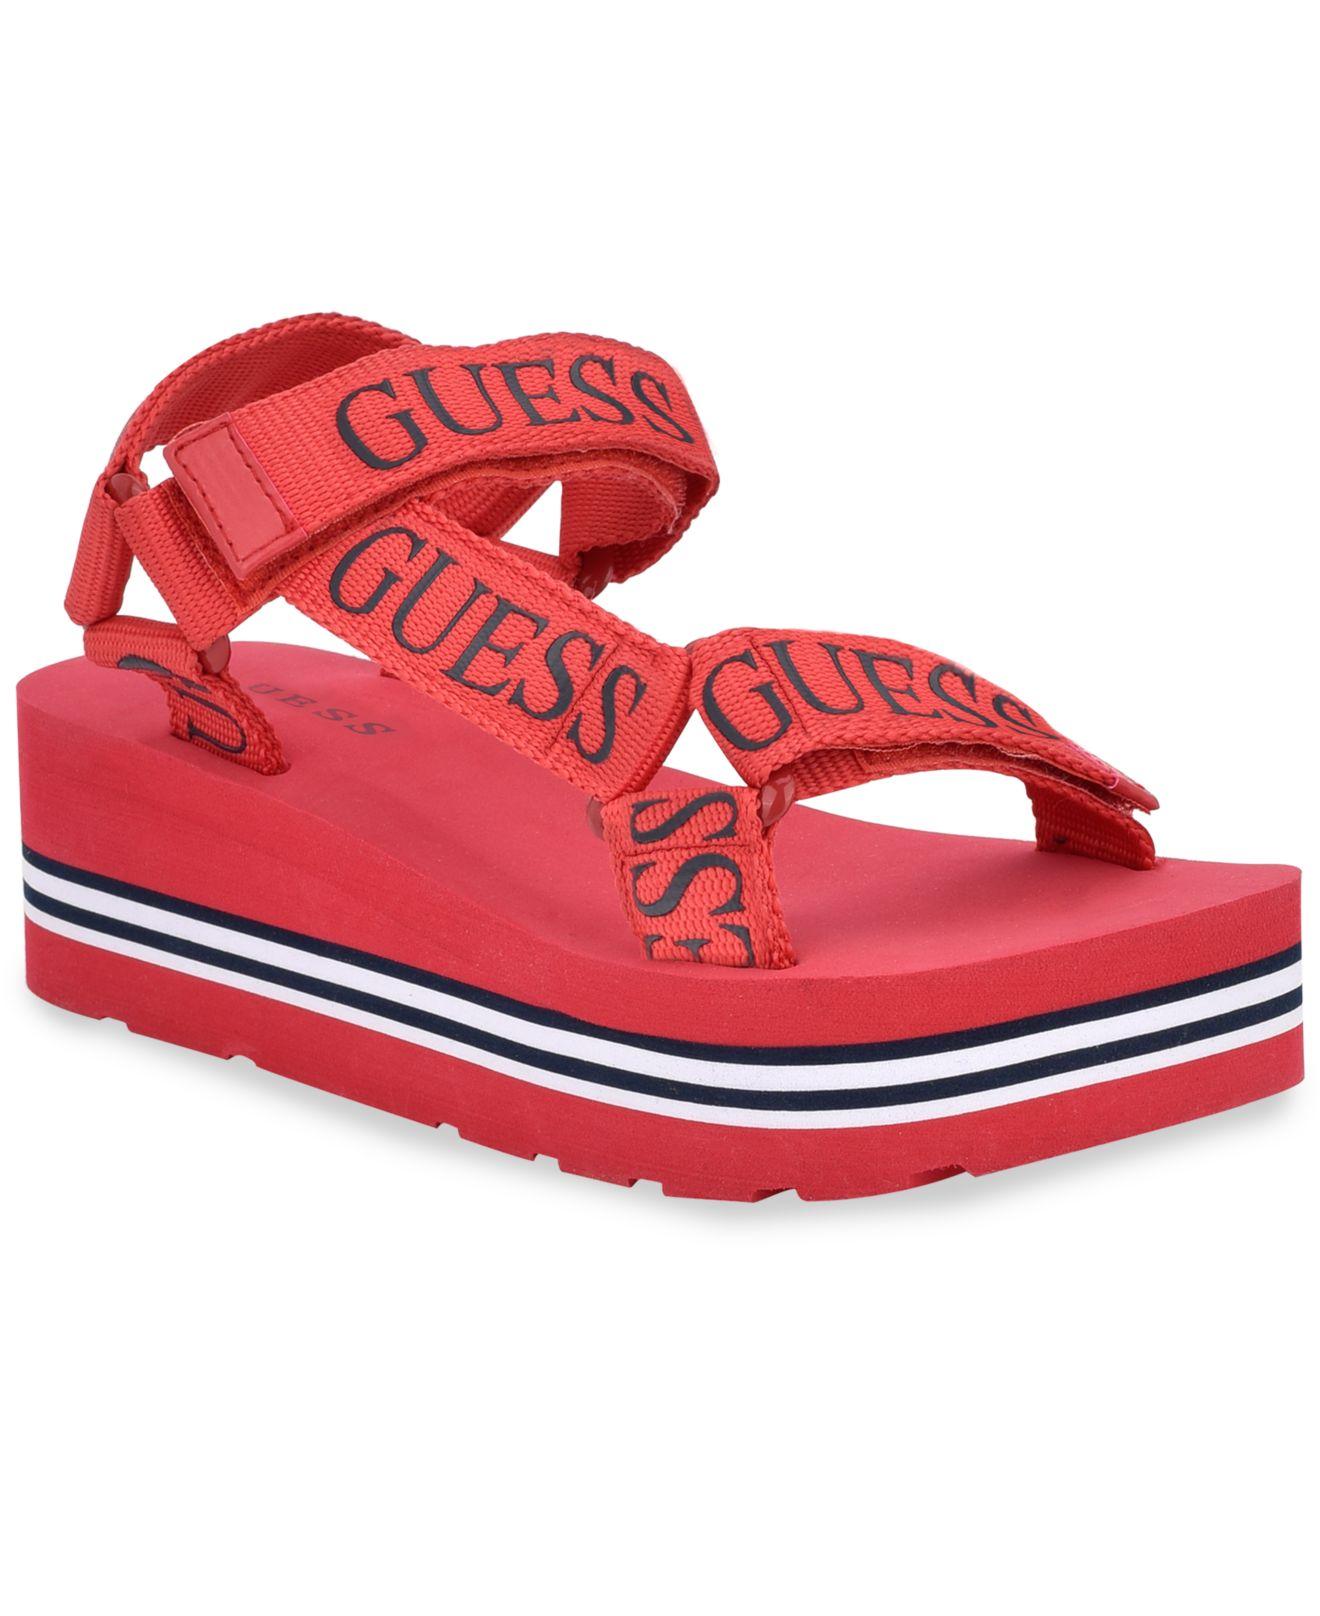 Guess Avin Strappy Platform Sandals in Red | Lyst